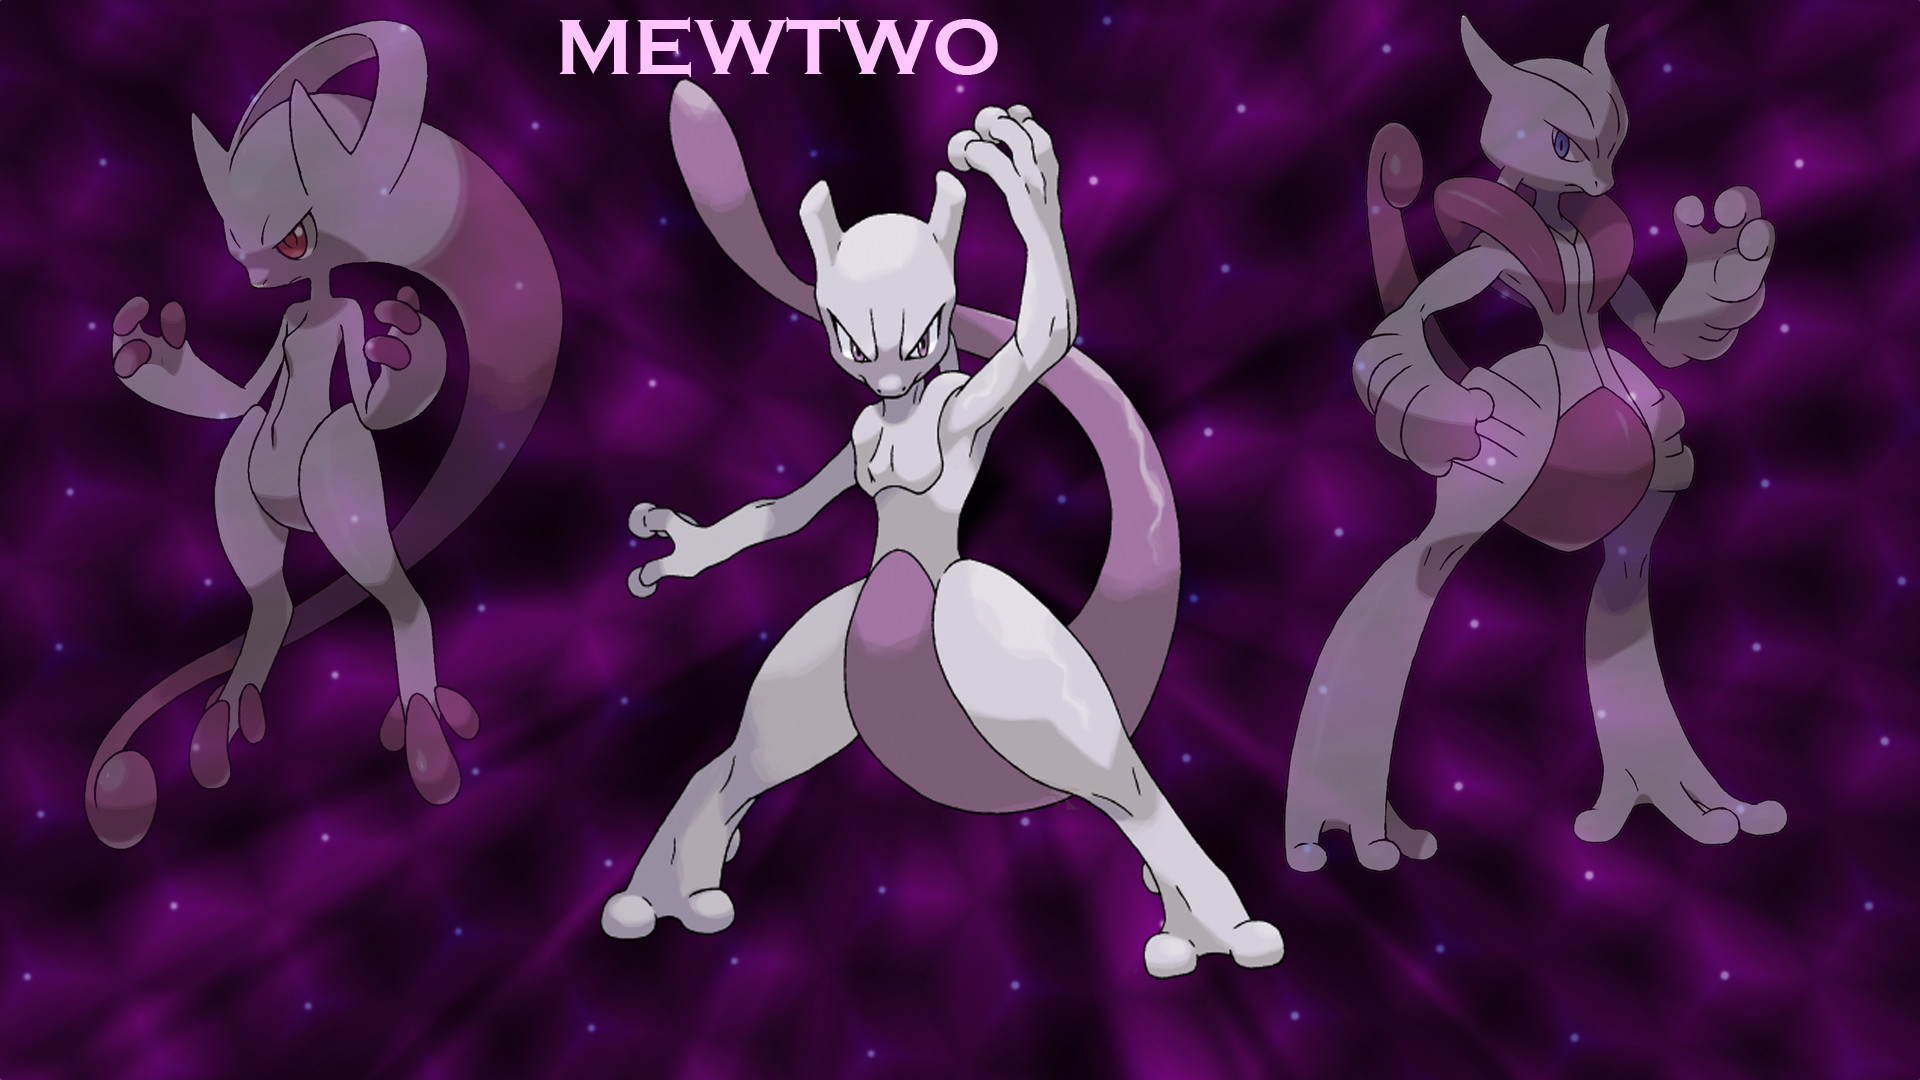 1920x1080 mewtwo and mew wallpaper mewtwo armor wallpaper mewtwo quote wallpaper  